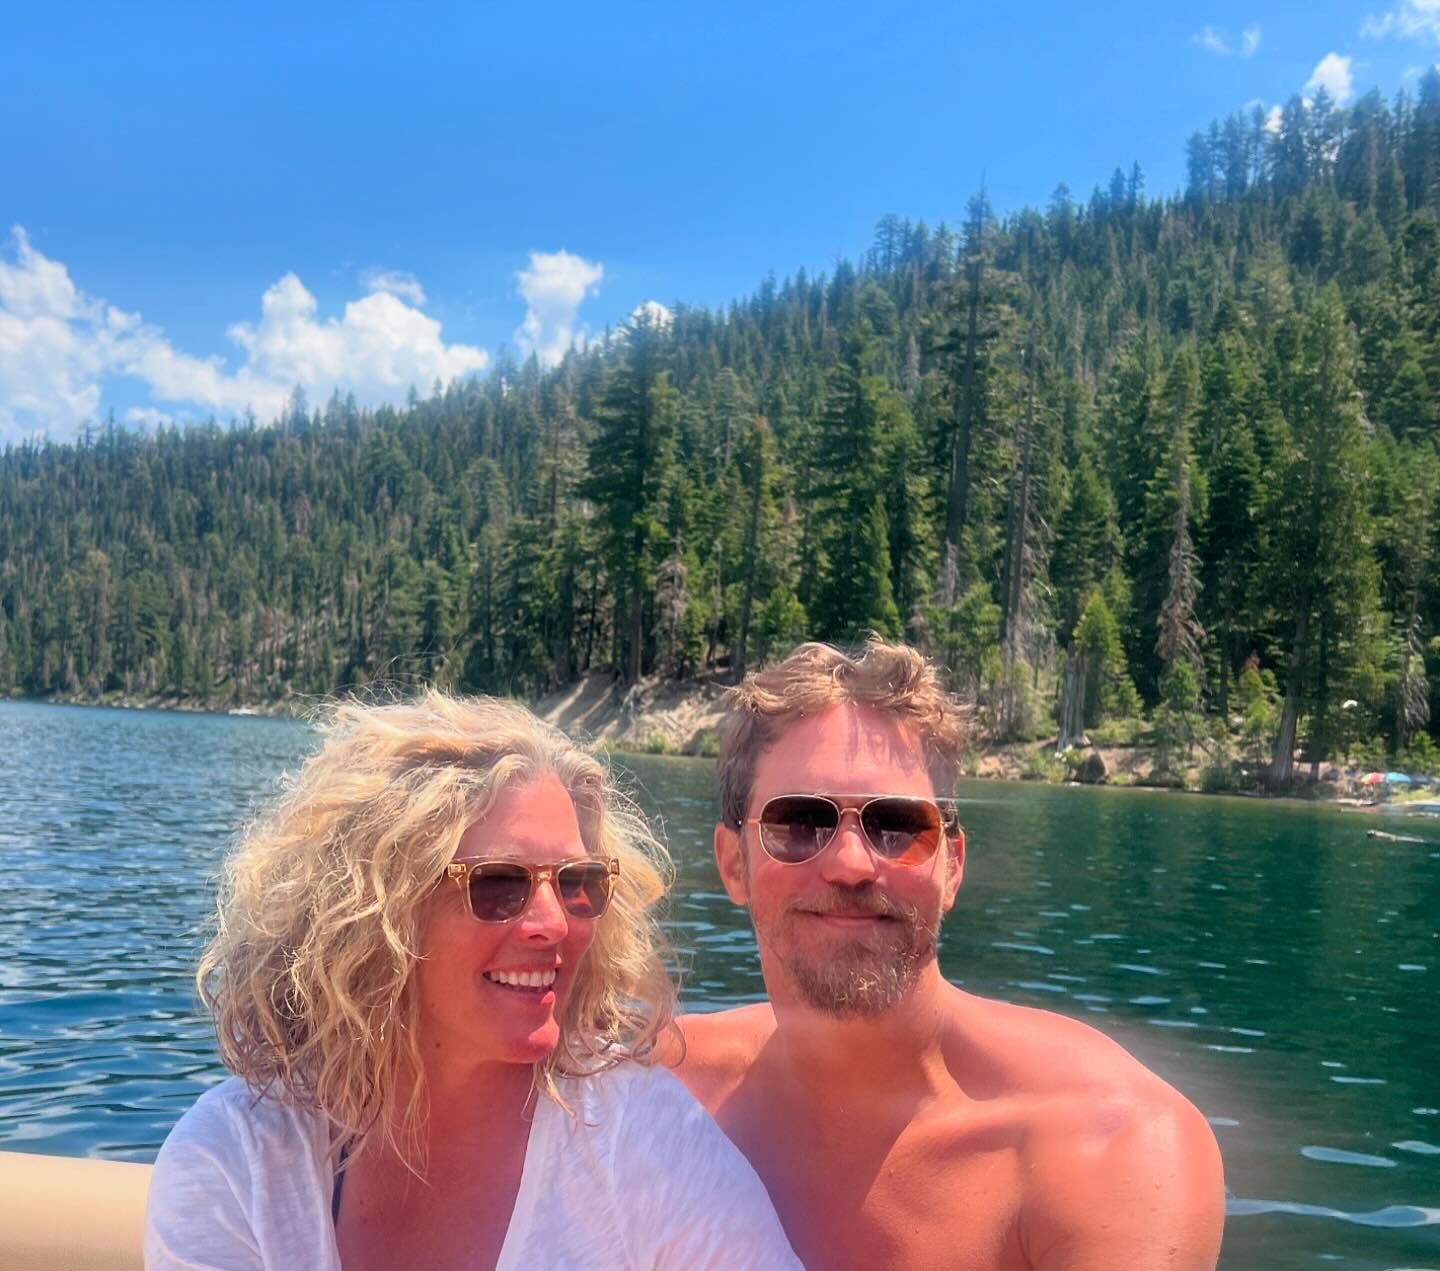 Laura Wright was joined by her boyfriend and co-star, Wes Ramsey, at Lake Tahoe